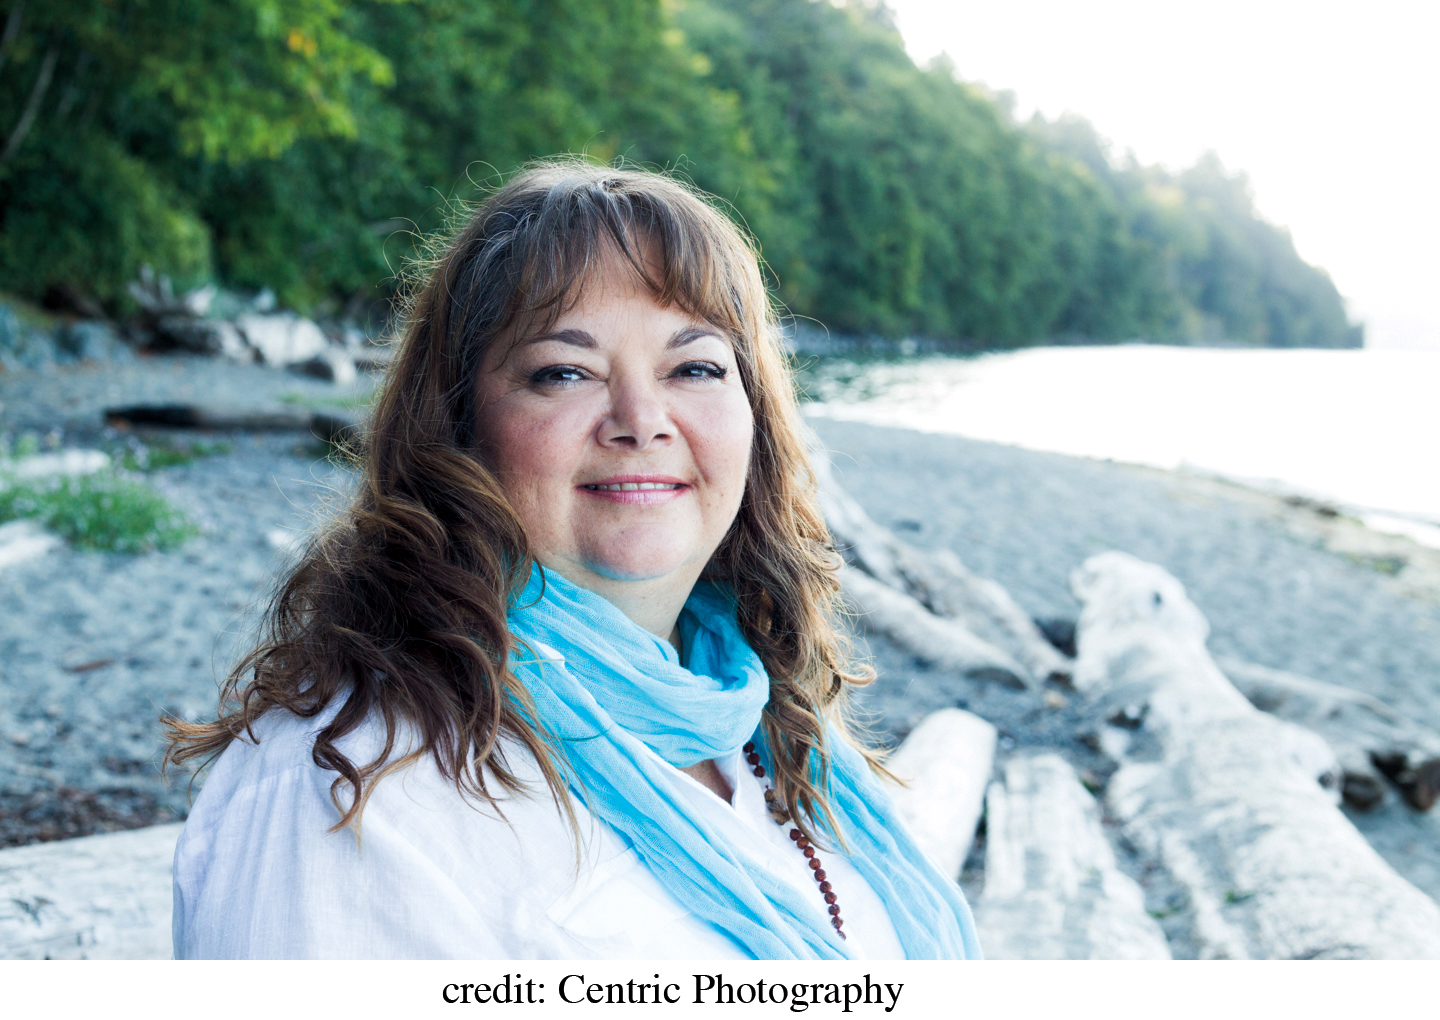 Share National Indigenous Peoples Day with author Monique Gray Smith